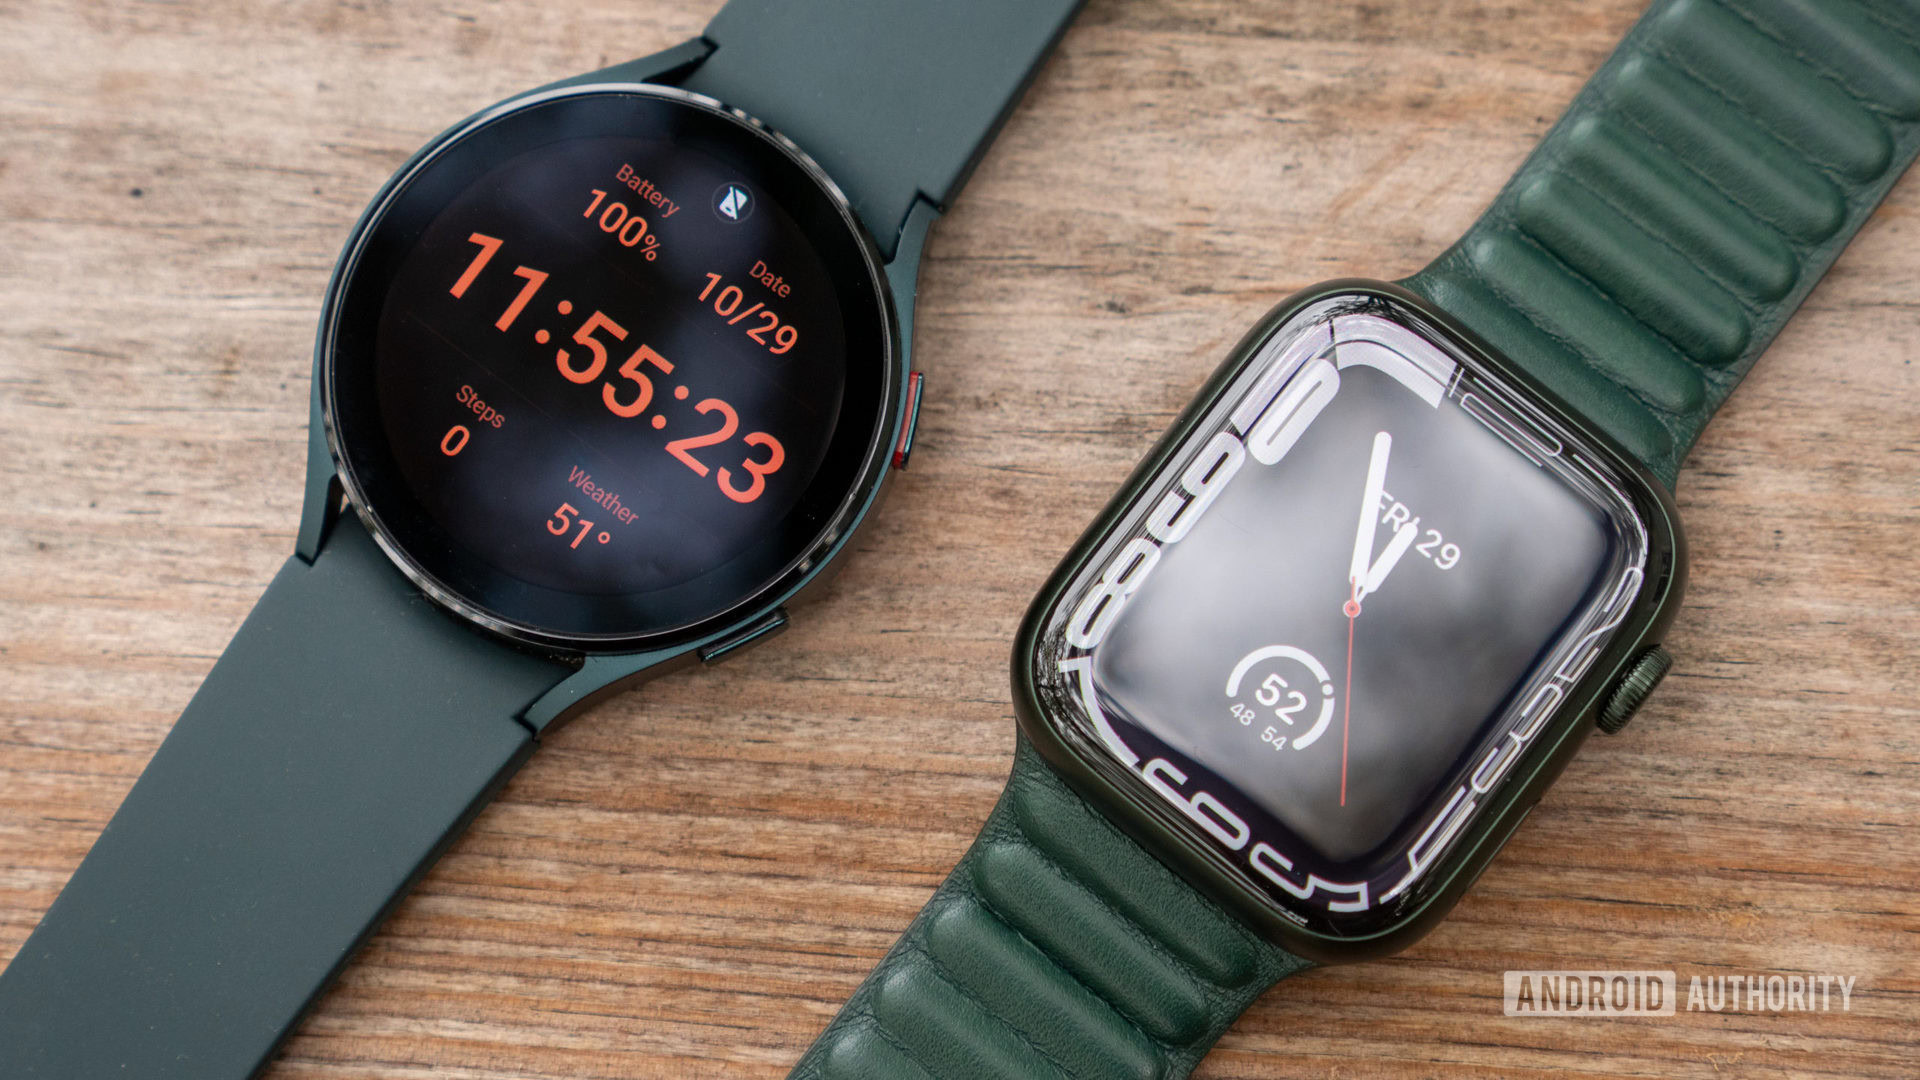 An Apple Watch Series 7 and Samsung Galaxy Watch 4 rest side by side, each displaying a watch face.